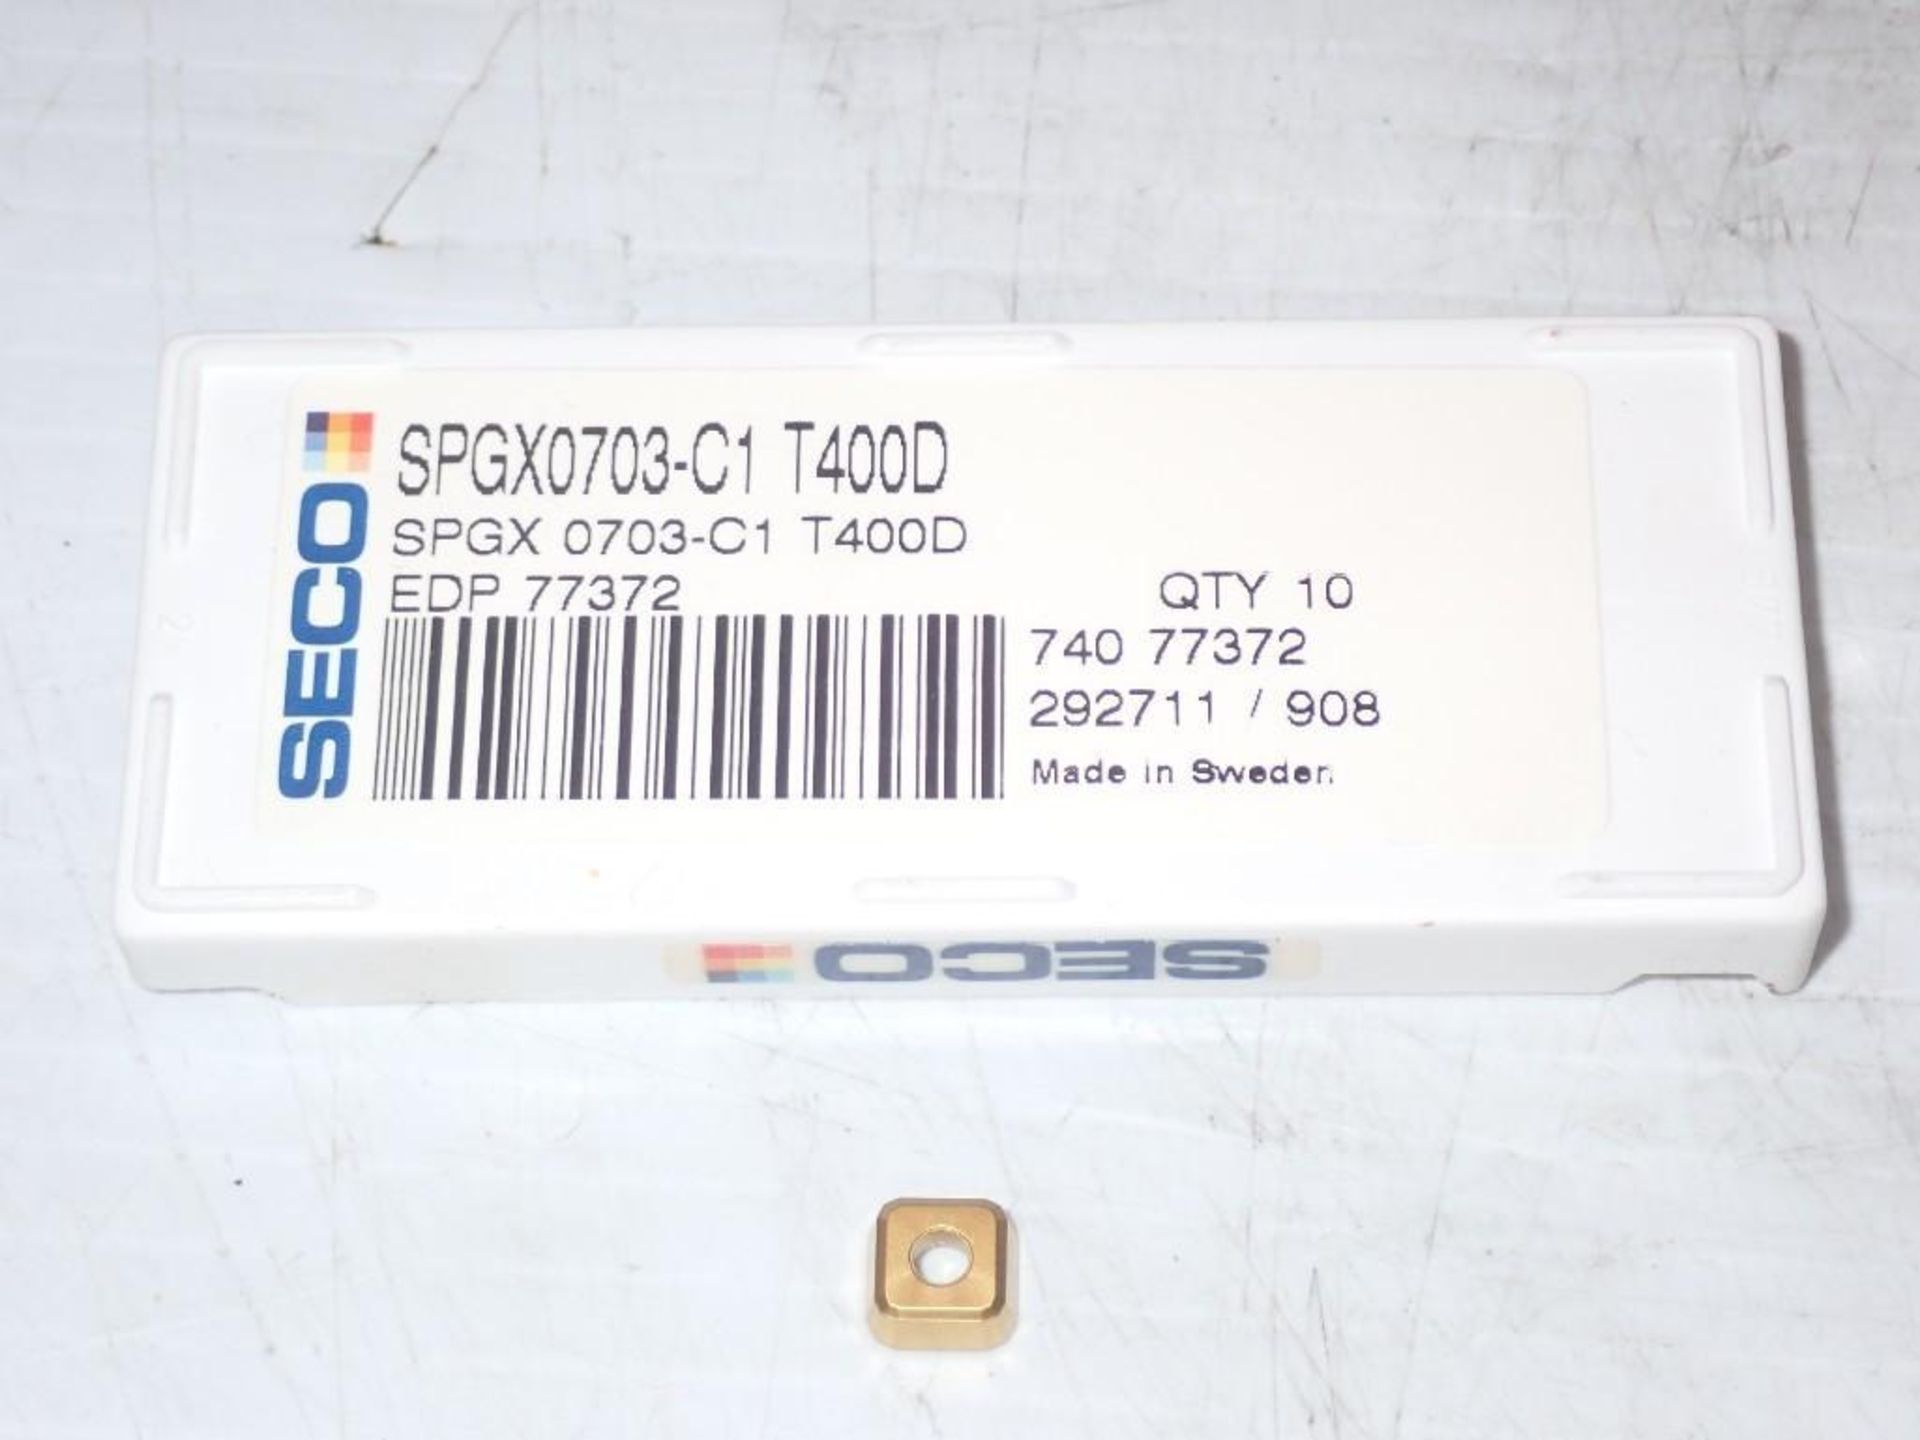 Lot of Seco #SPGX0703-C1 T400D Carbide Inserts - Image 2 of 2